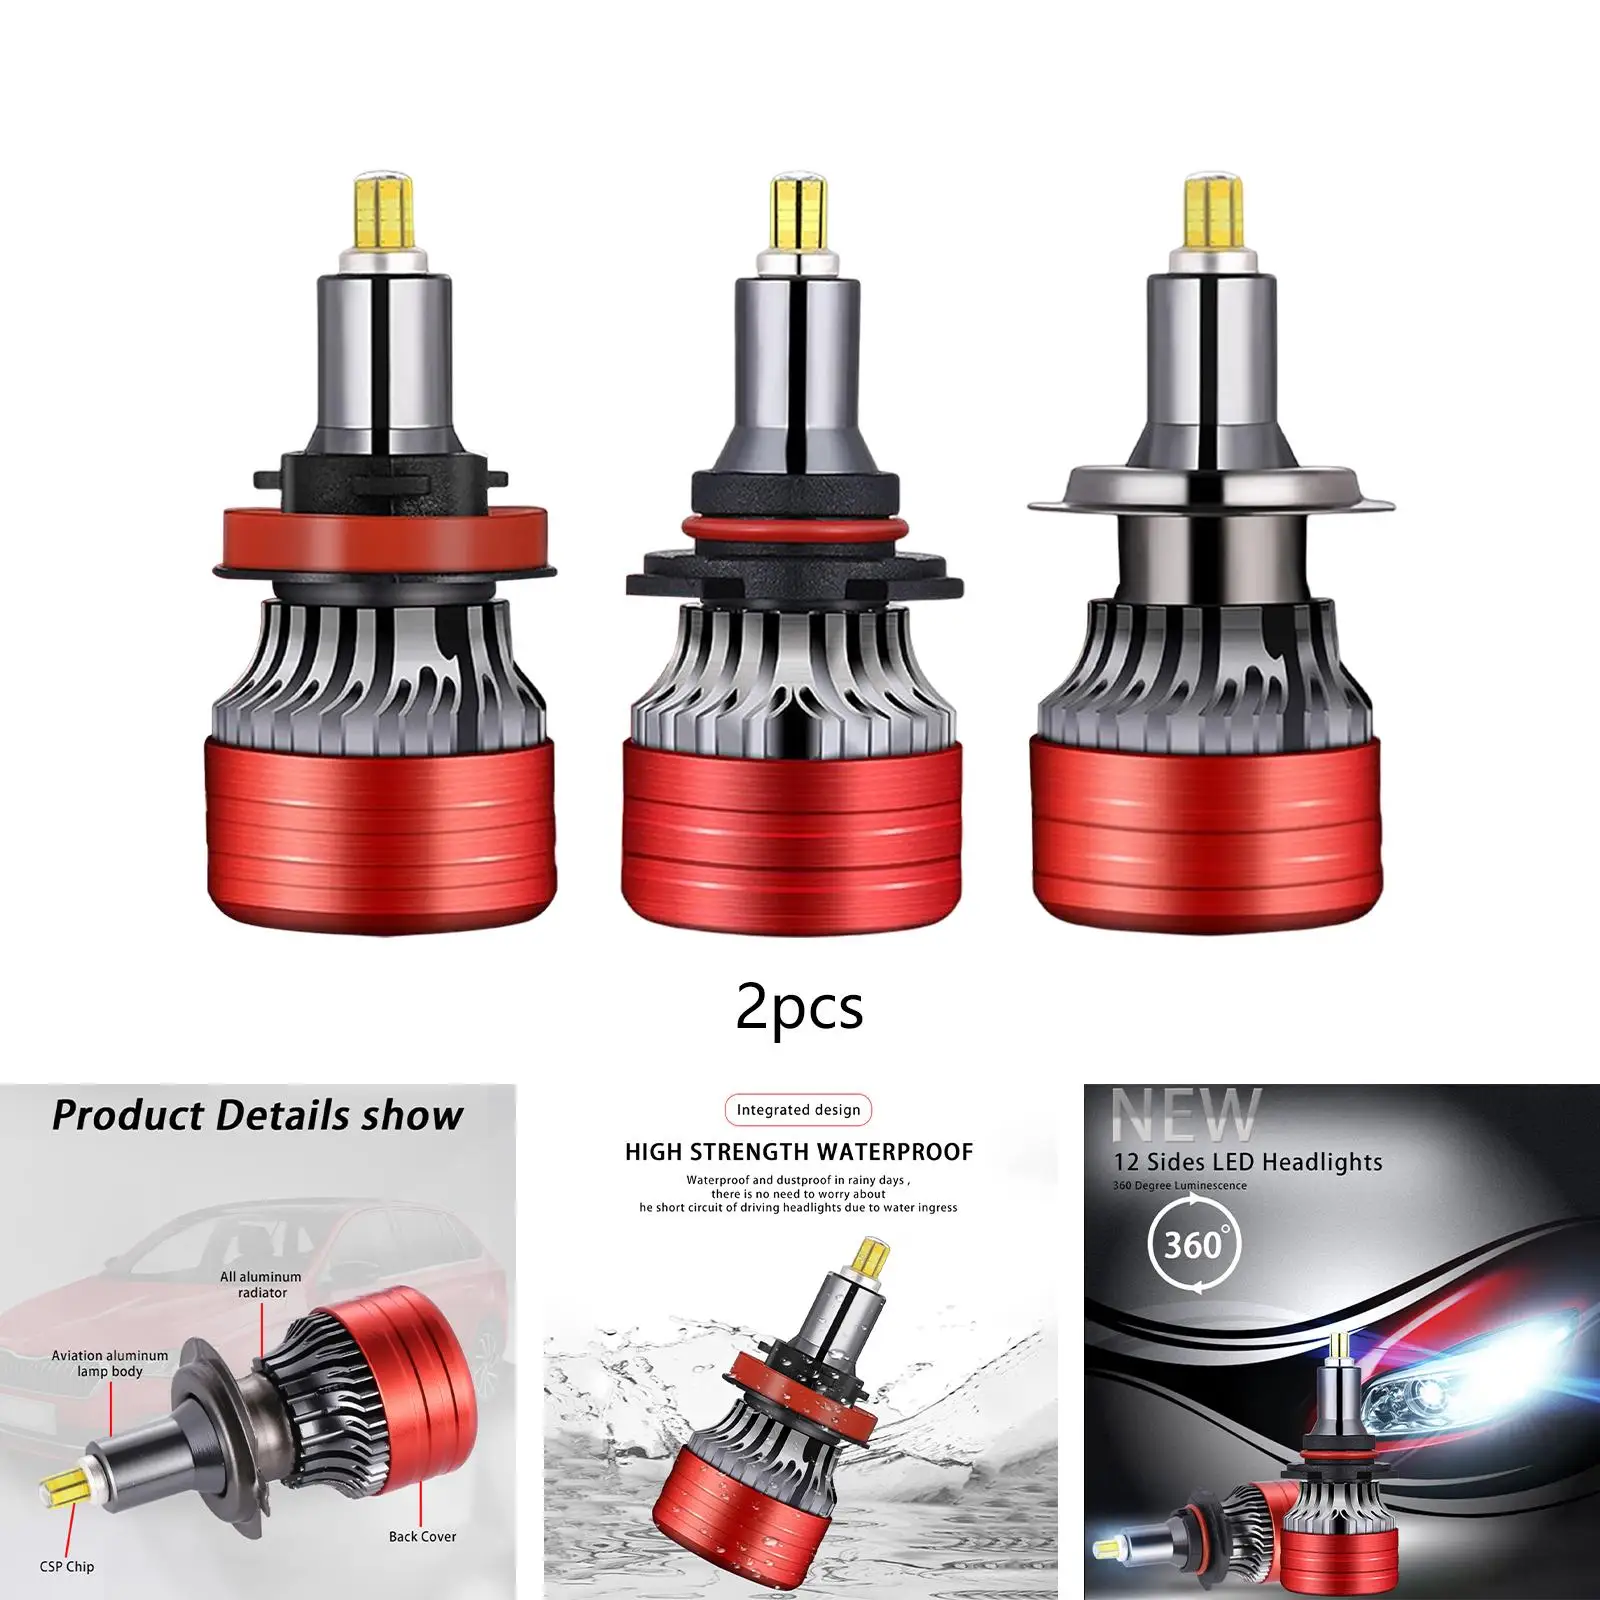 LED Headlight Bulbs LED Headlight Conversion Kit 6 Sides for Car Replacement